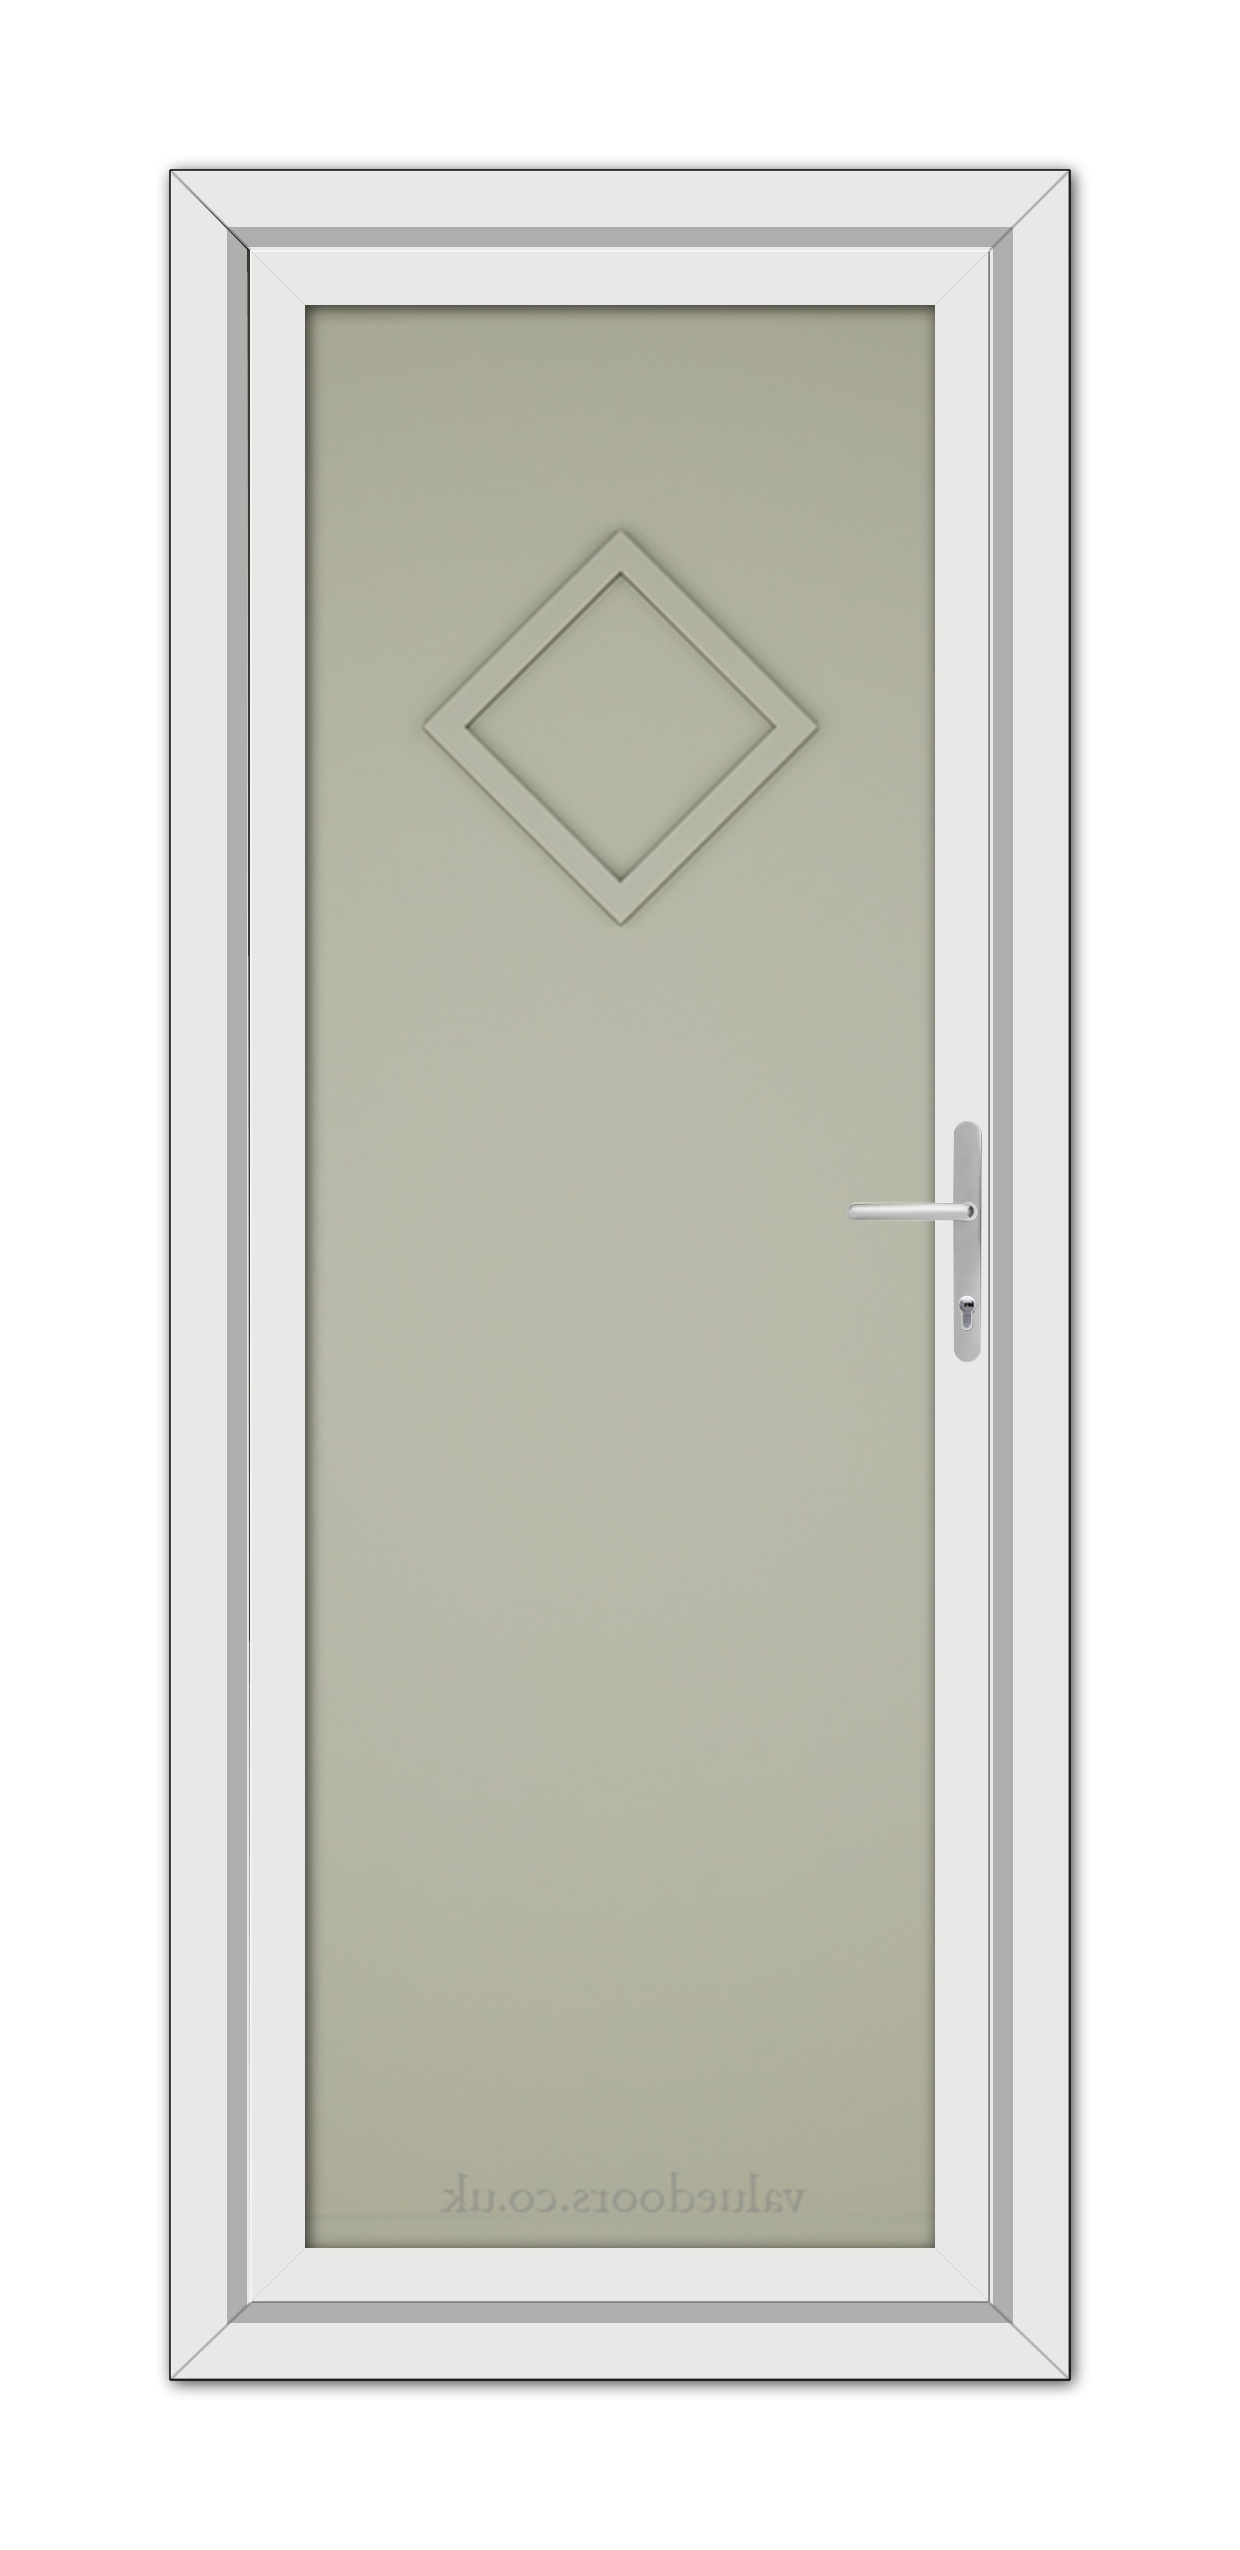 A vertical image of a closed Agate Grey Modern 5131 Solid uPVC door featuring a narrow frosted glass pane with a diamond-shaped design, framed by a white border with a chrome handle on the right side.